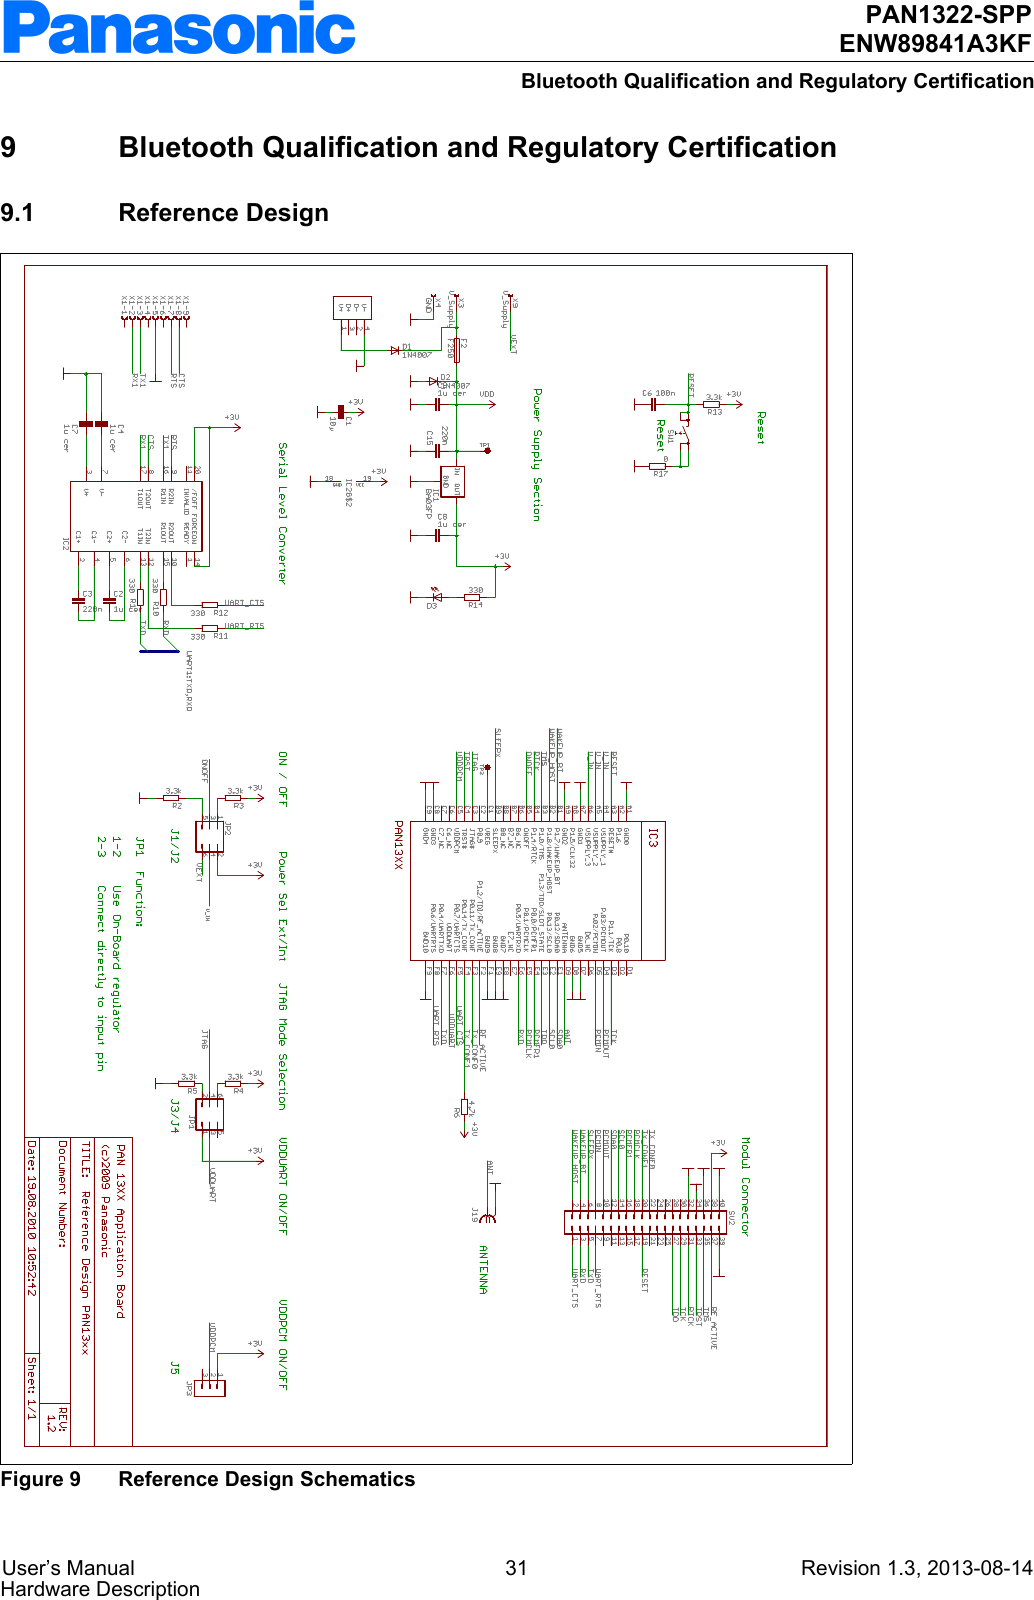  User’s Manual 31 Revision 1.3, 2013-08-14Hardware Description PAN1322-SPPENW89841A3KFBluetooth Qualification and Regulatory Certification9Bluetooth Qualification and Regulatory Certification9.1 Reference DesignFigure 9 Reference Design Schematics